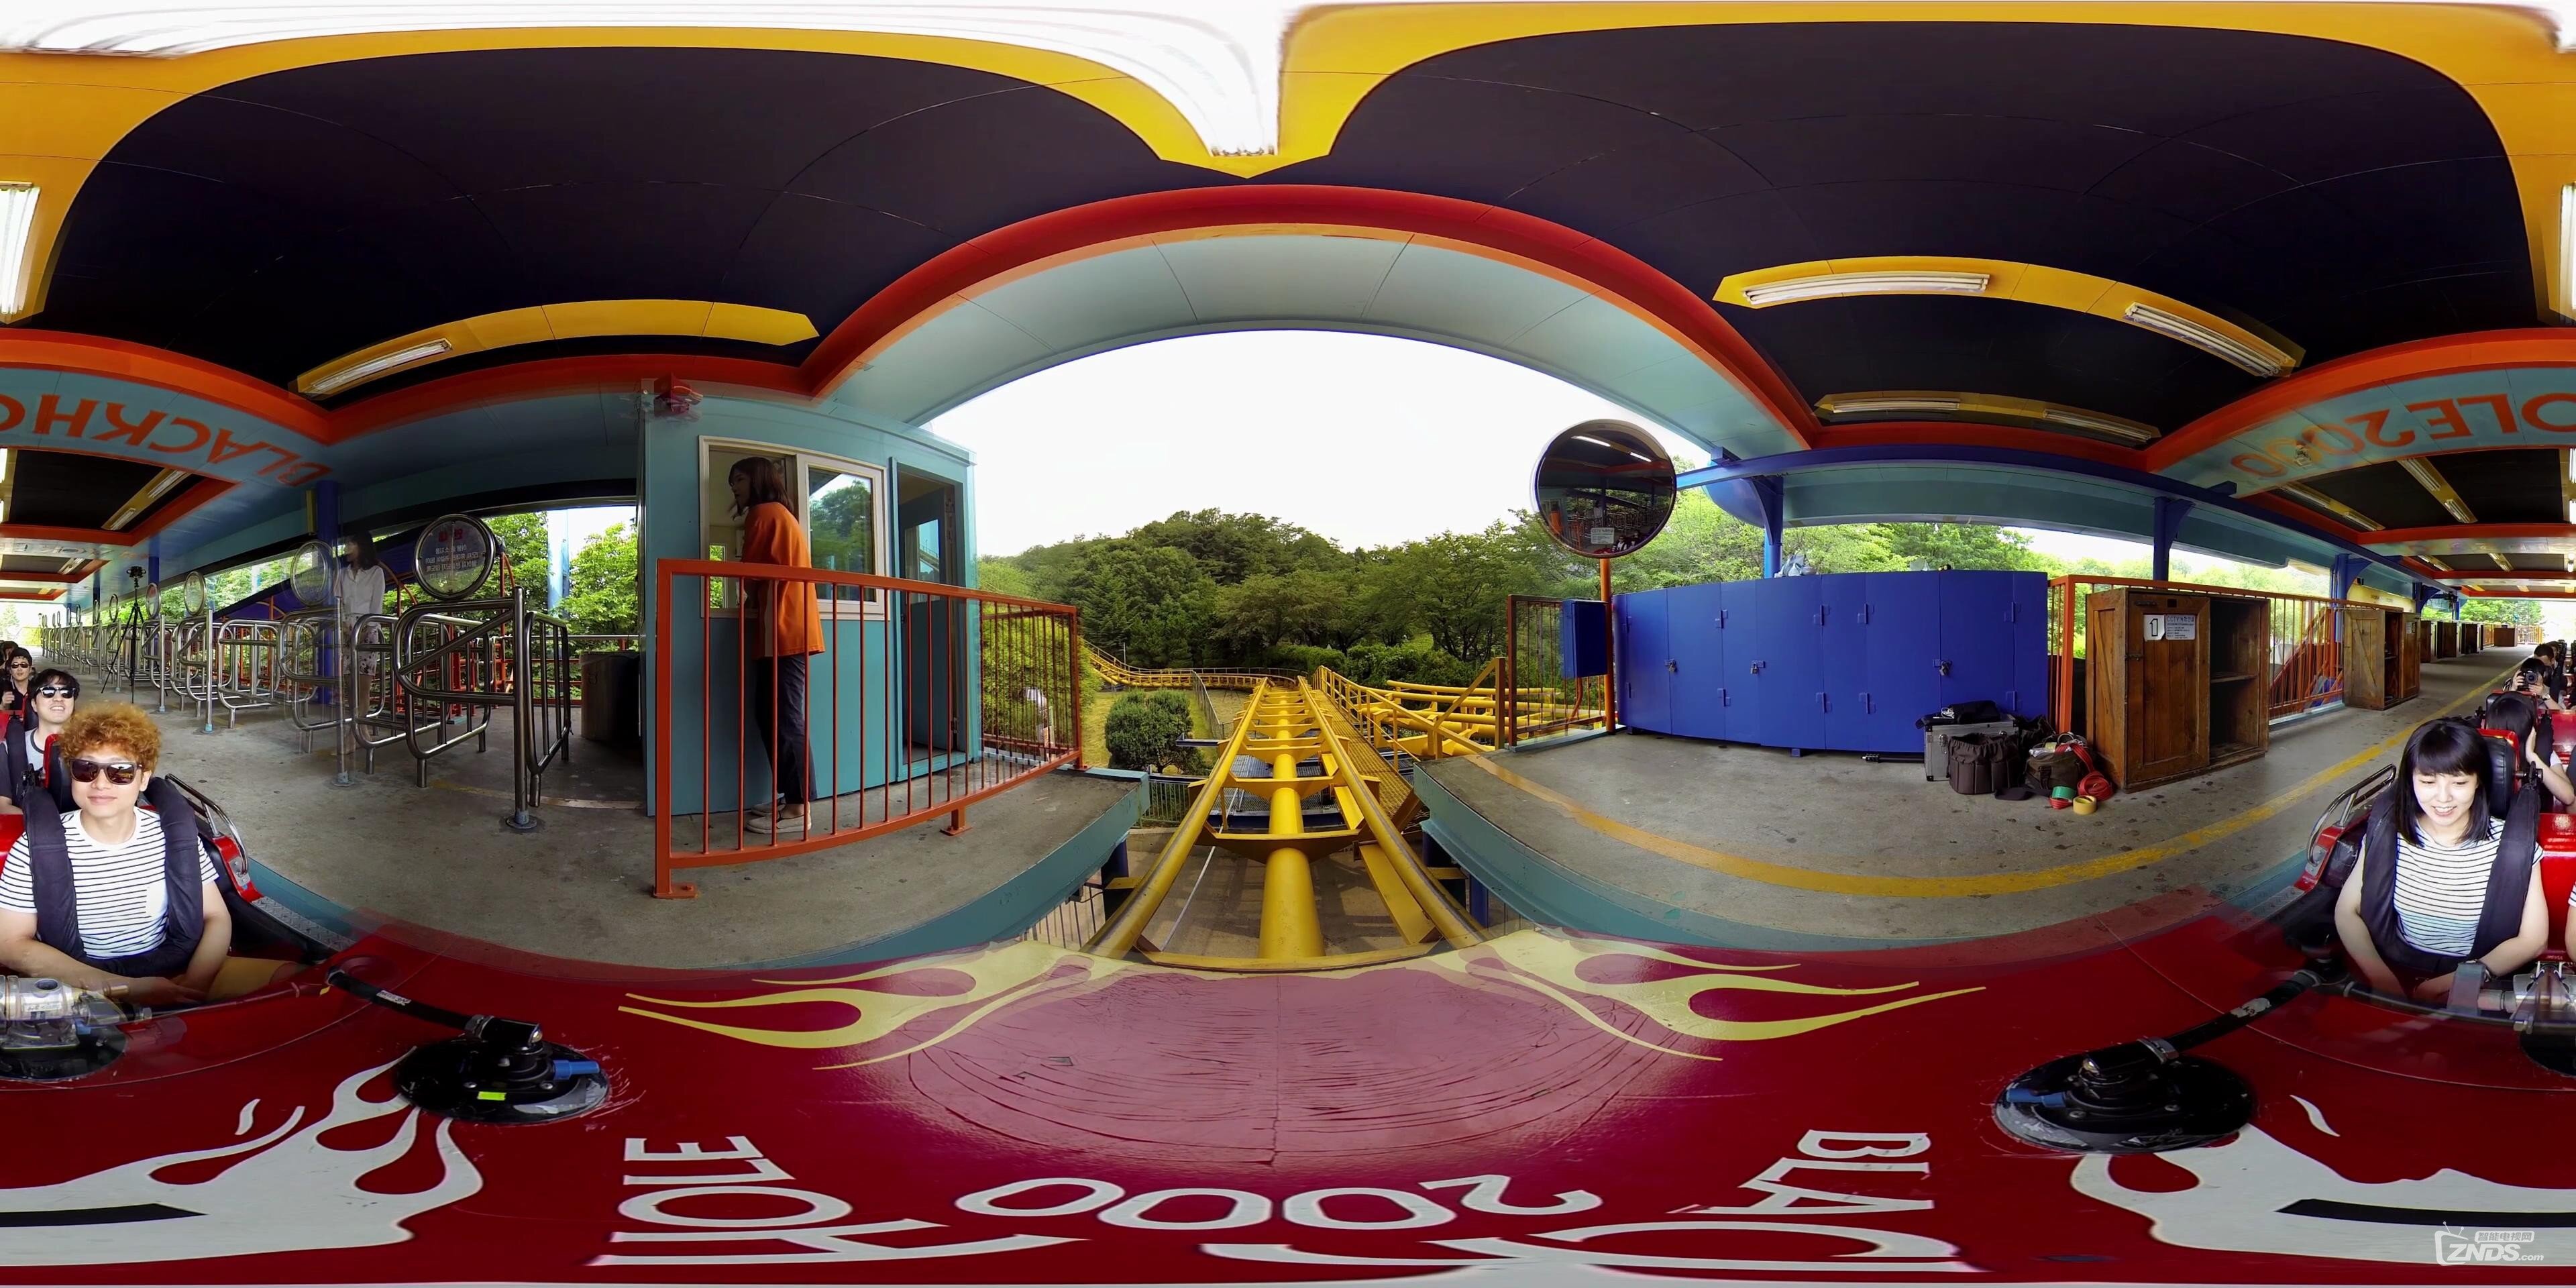 [Extreme] 360° RollerCoaster at Seoul Grand Park__20160716203921.JPG